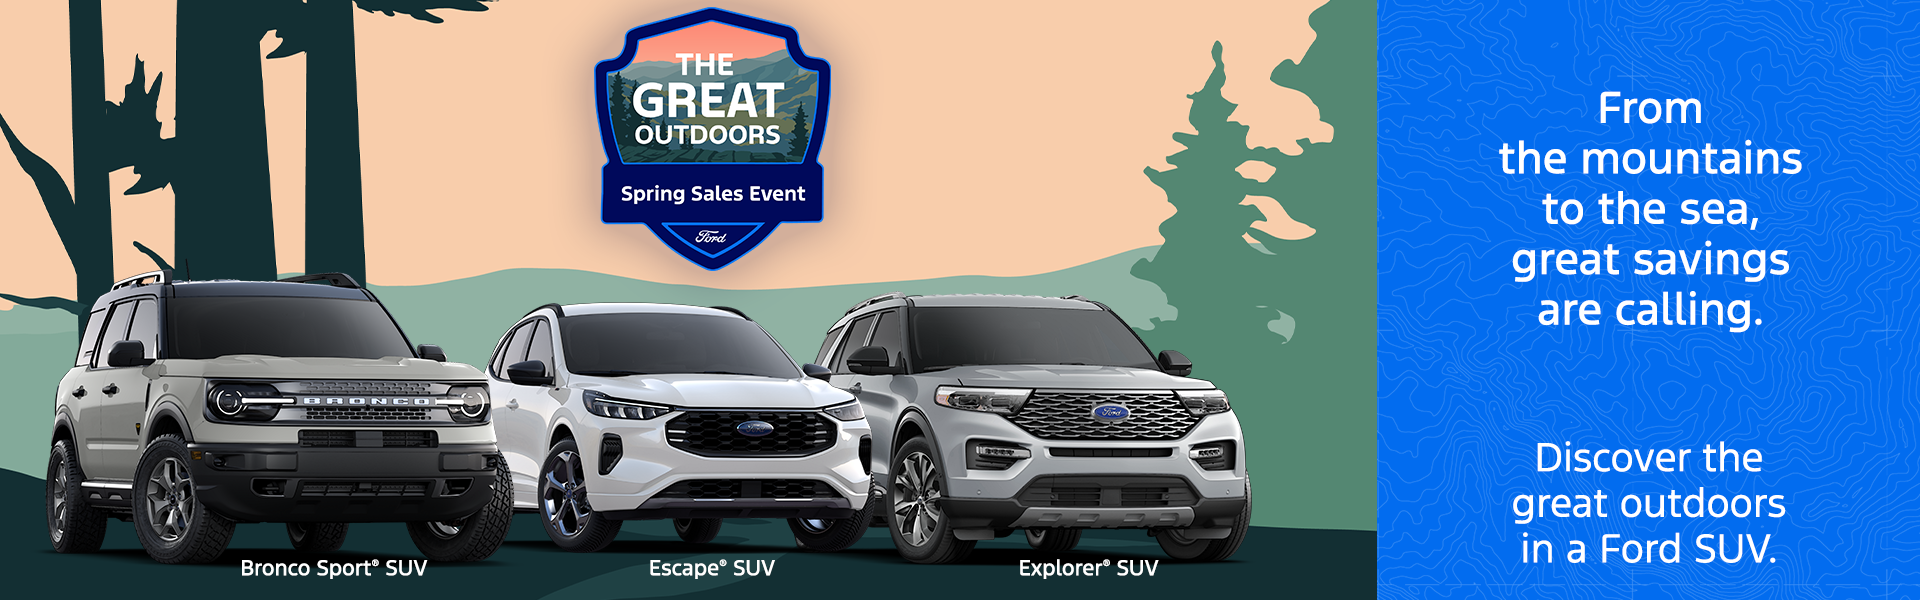 The Great Outdoors Spring Sales Event